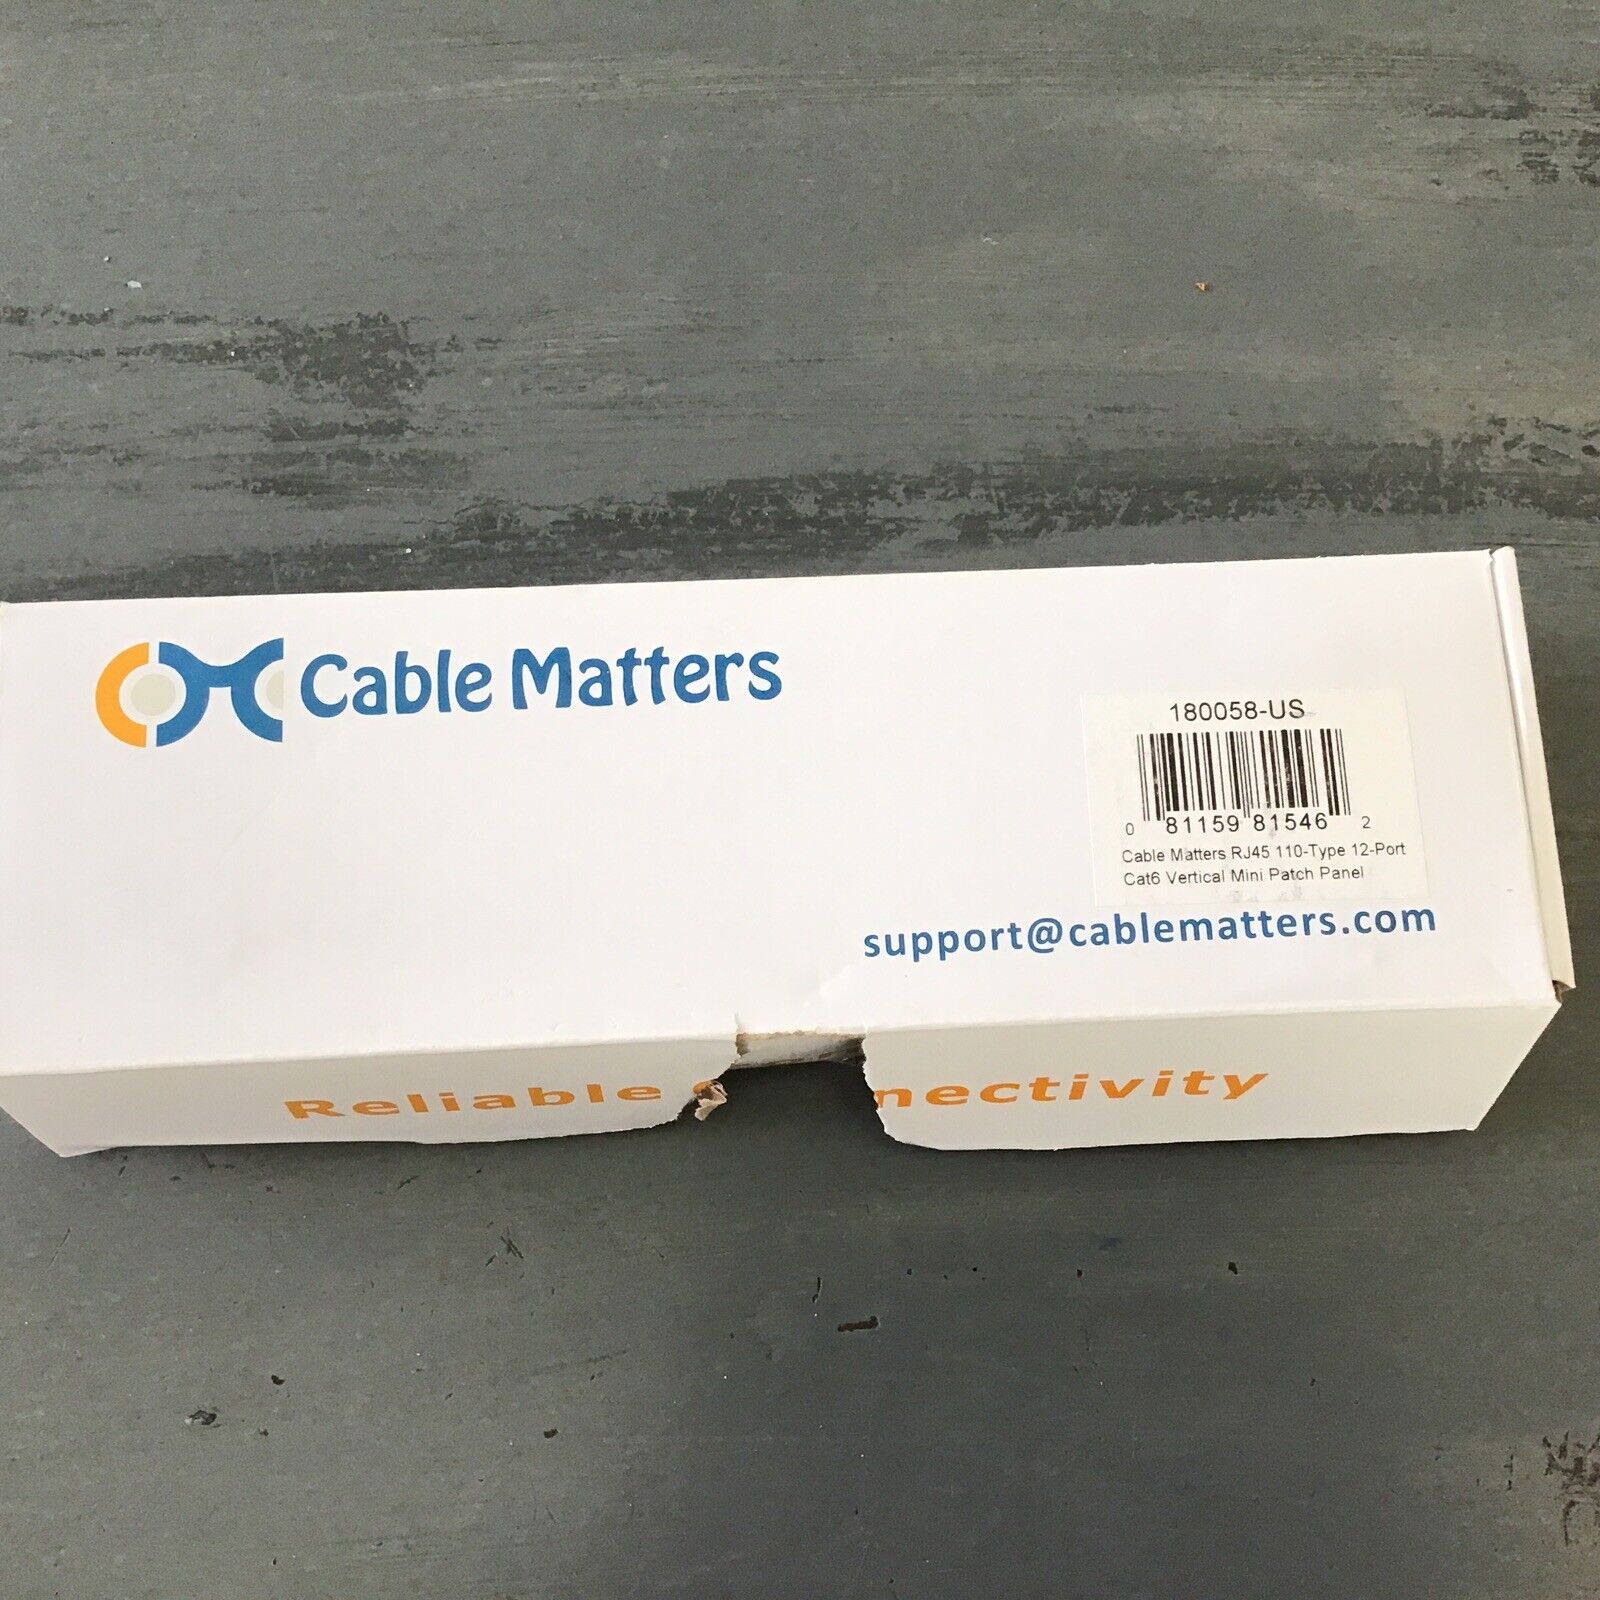 Cable matters RJ45 110 type 12 port cat6 vertical mini patch panel. Sealed